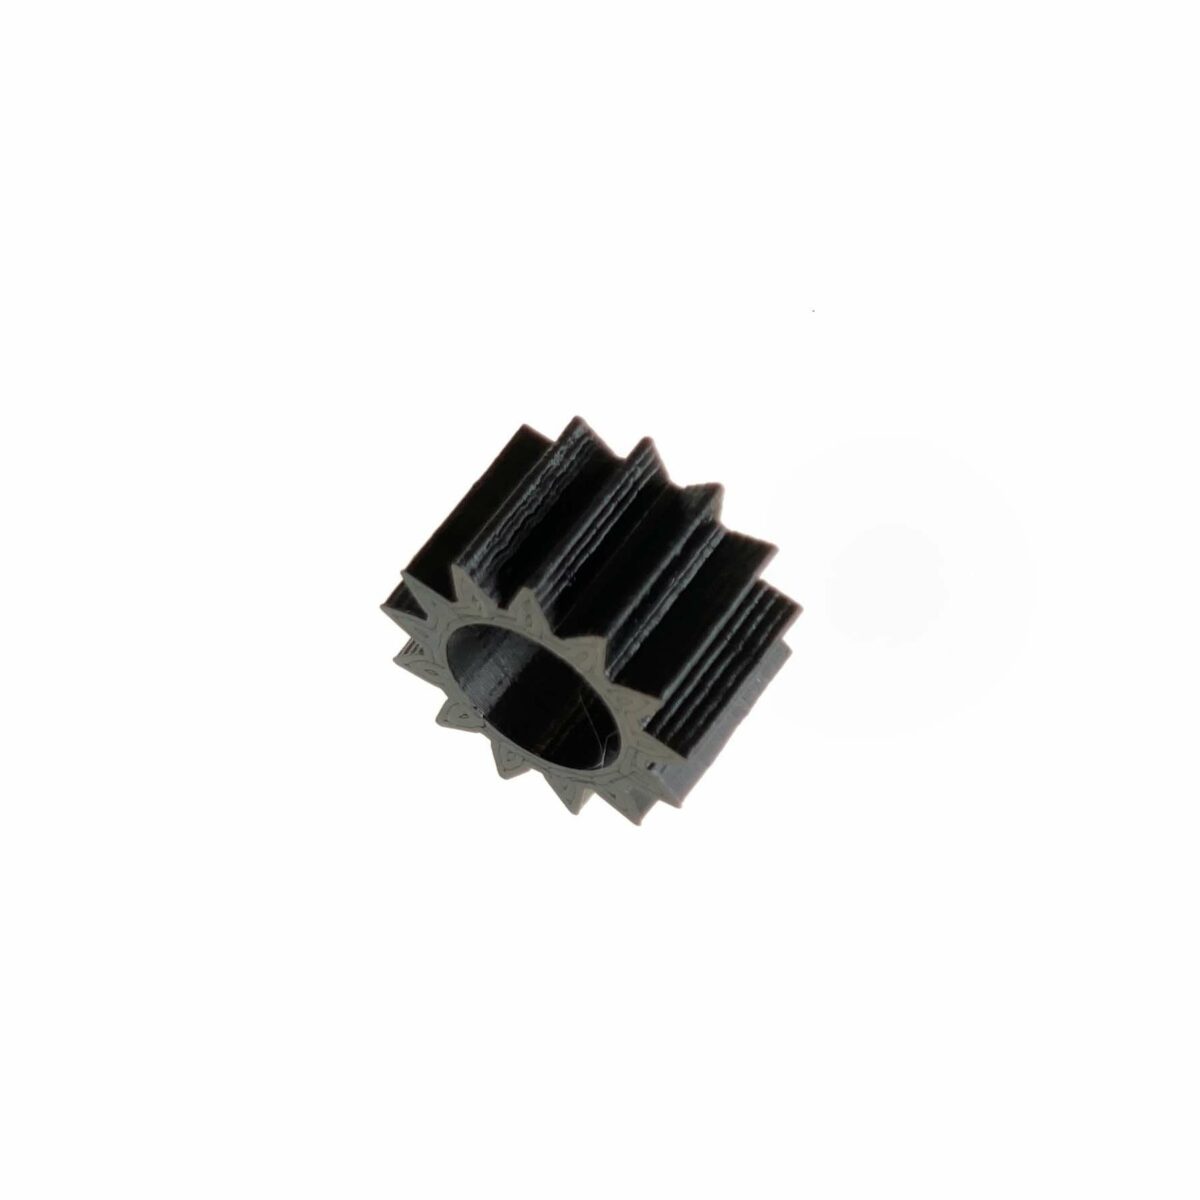 Technics SL-B3 Spindle Gear Replacement 2